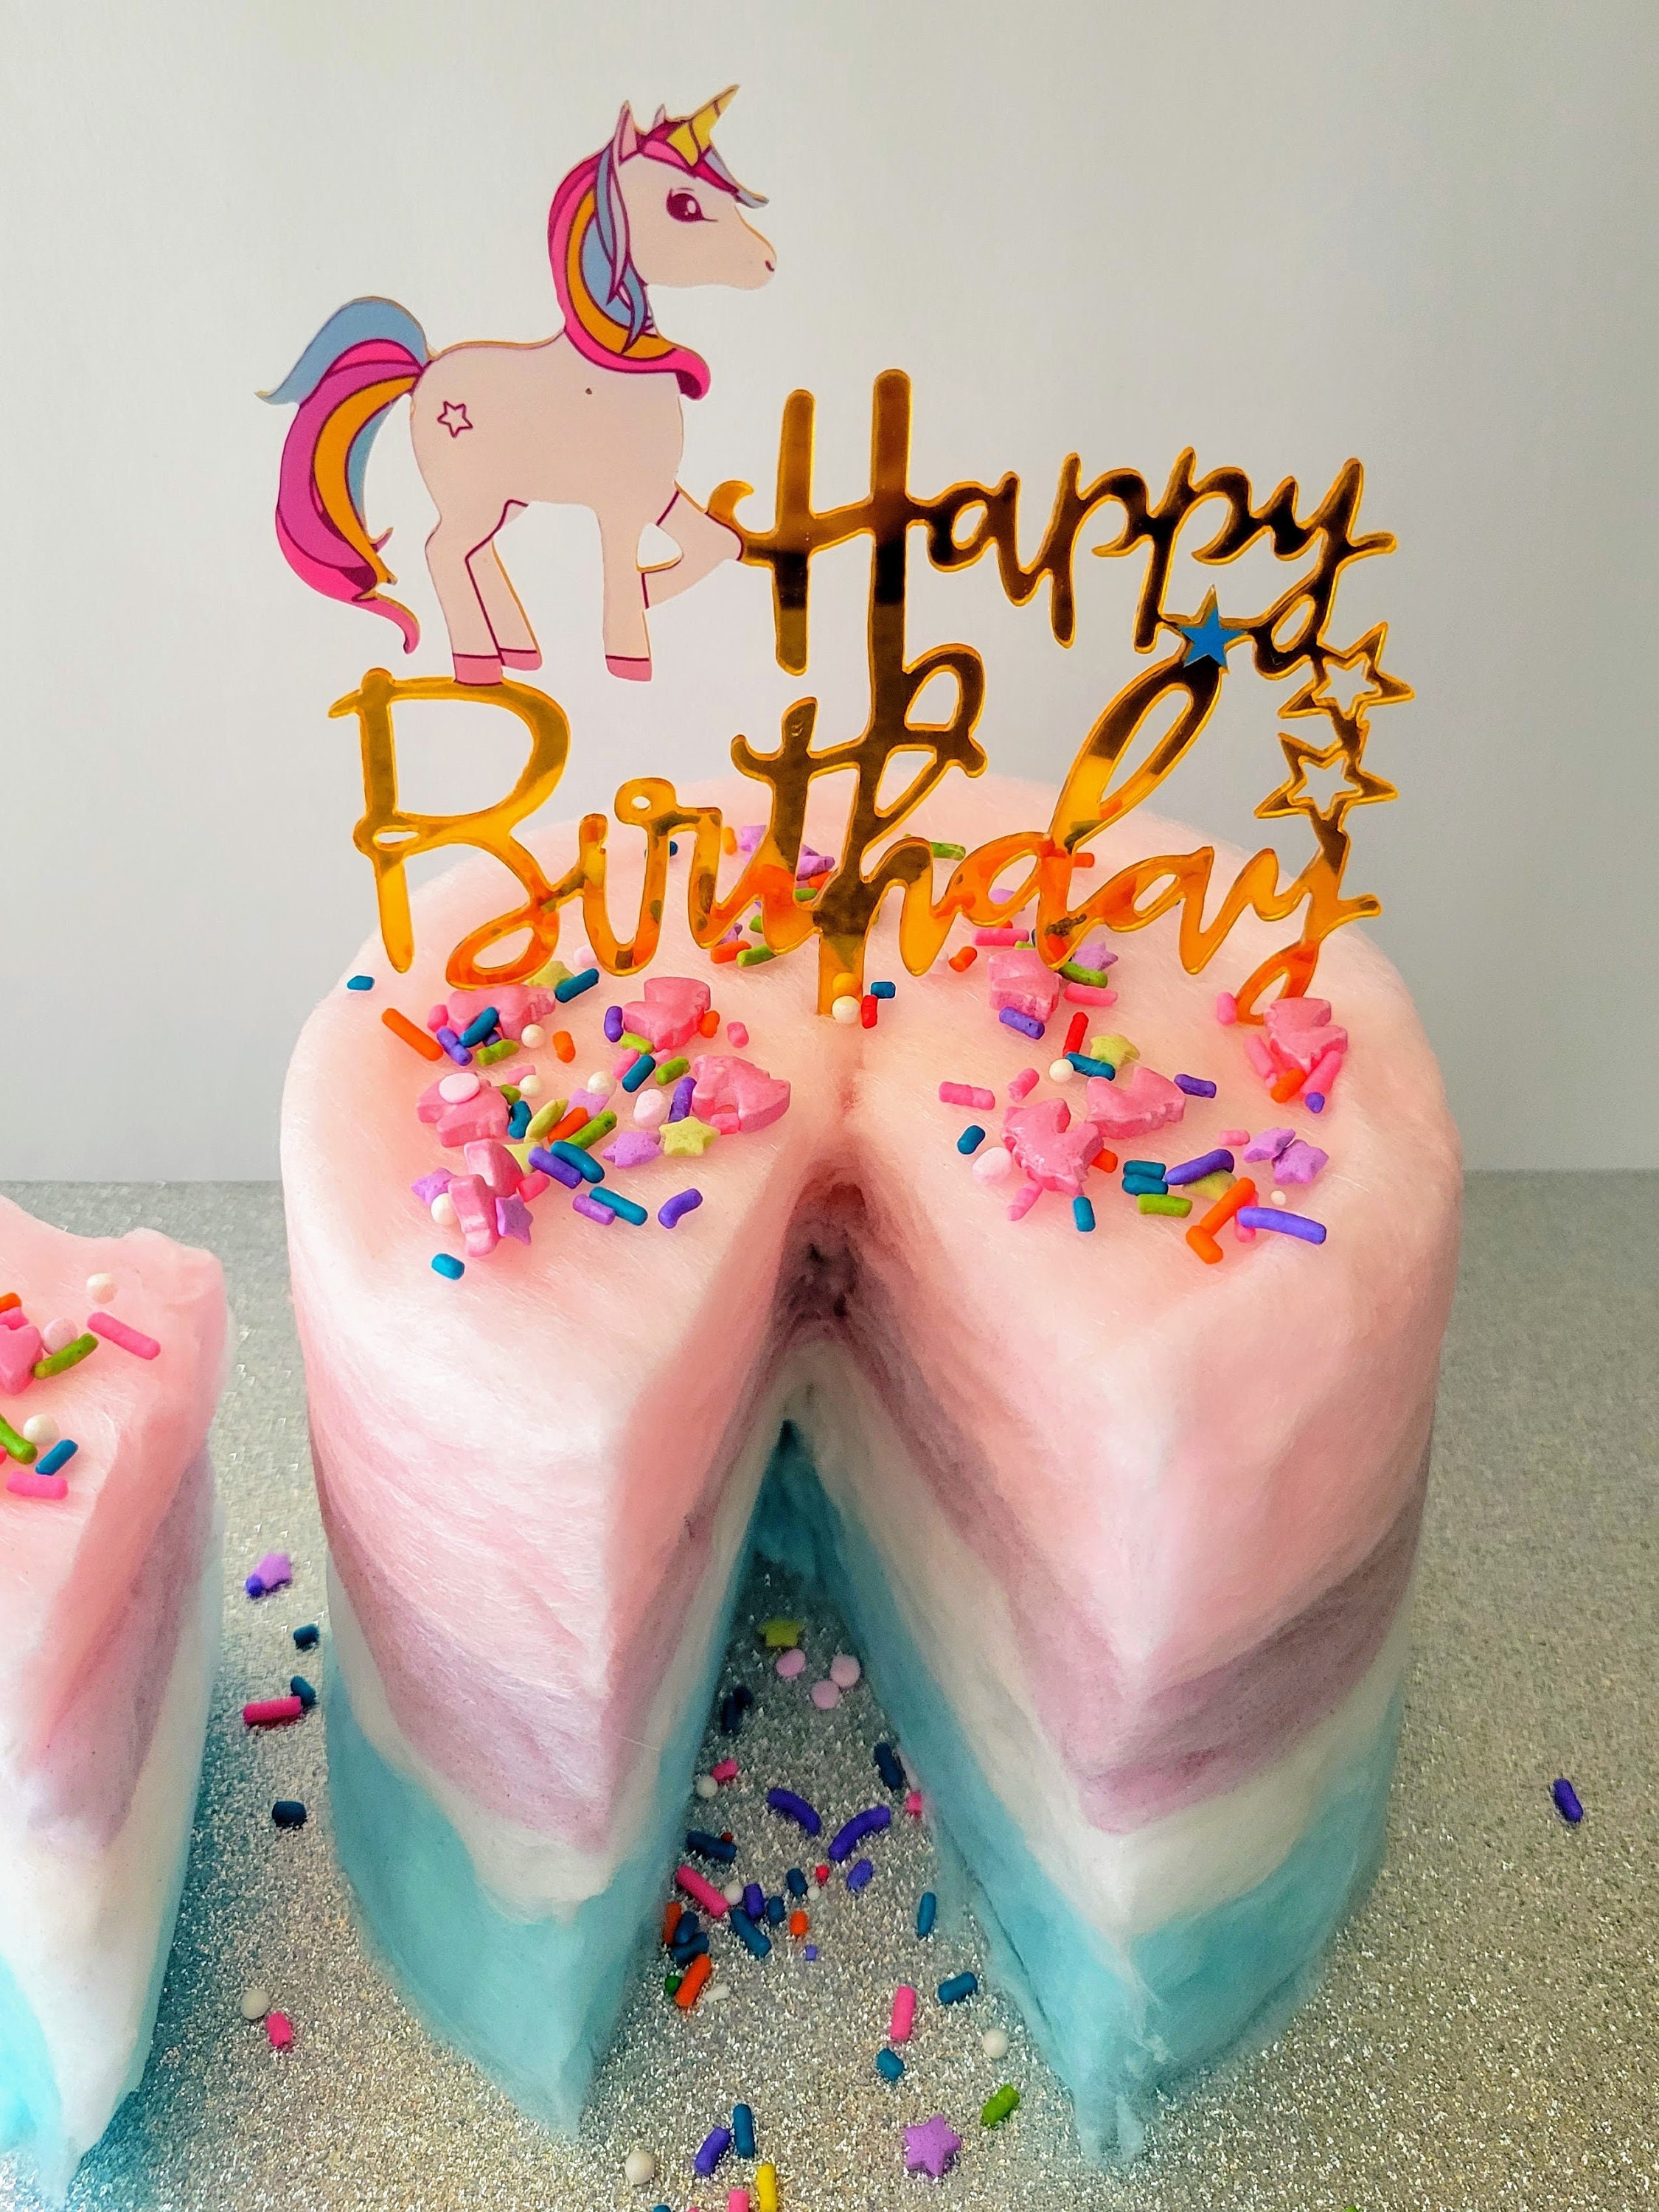 Amazon.com: Cotton Candy Unicorn Sprinkles | Pastel Pink, Purple, Blue,  White Unicorn Sprinkles for Cake Decorating | Great for Unicorn Themed  Birthday Party, Cupcakes, Edible Decorations (0.5 cup/114g) : Grocery &  Gourmet Food